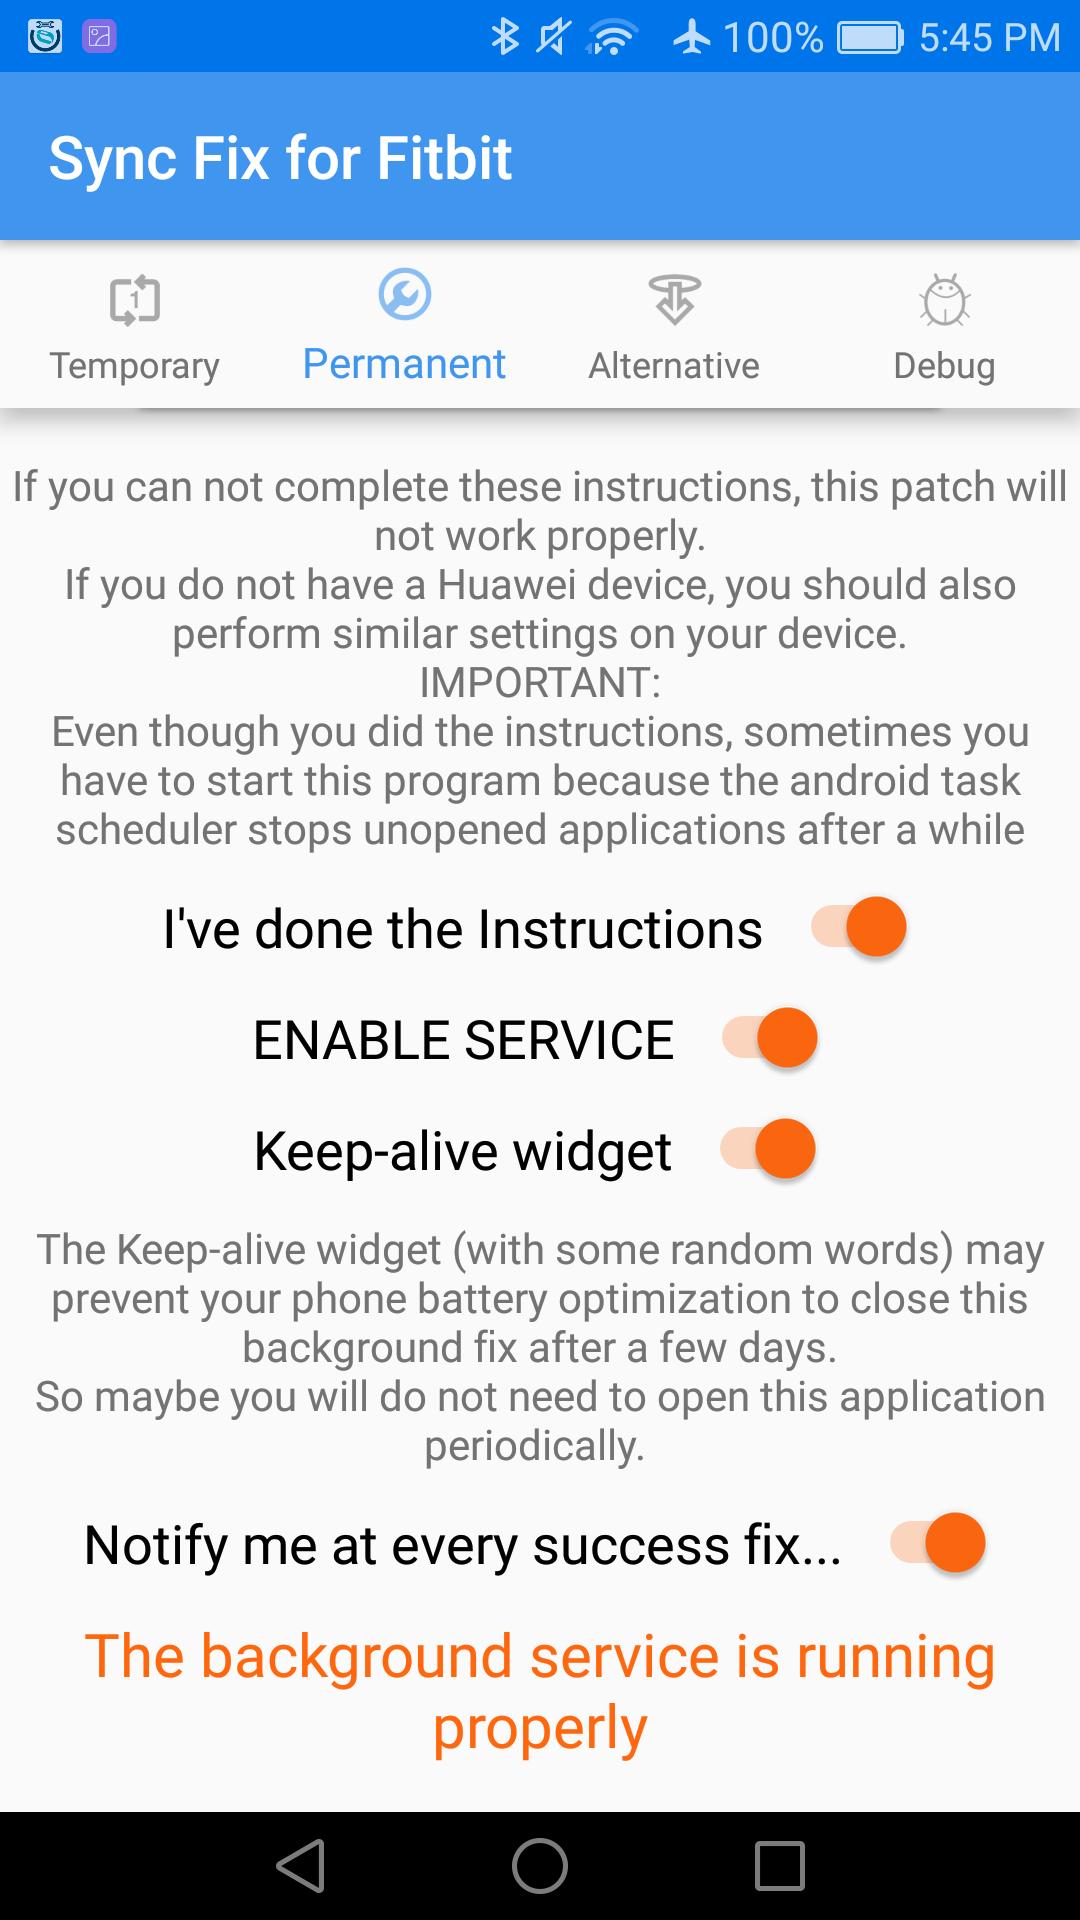 Sync Fix for Fitbit for Android - APK Download